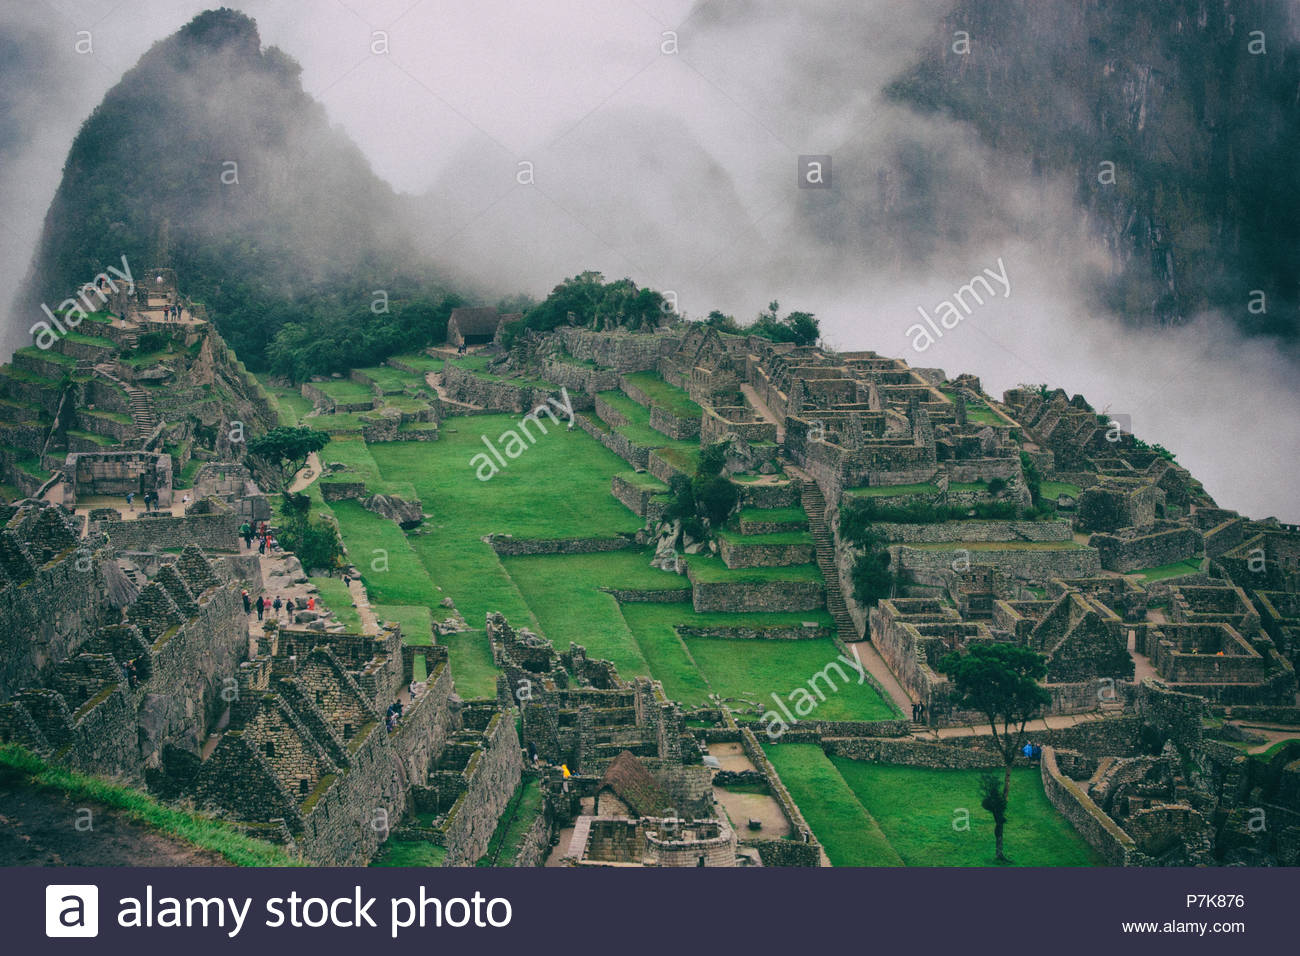 Classic Of The Ancient Mysterious City Machu Picchu With